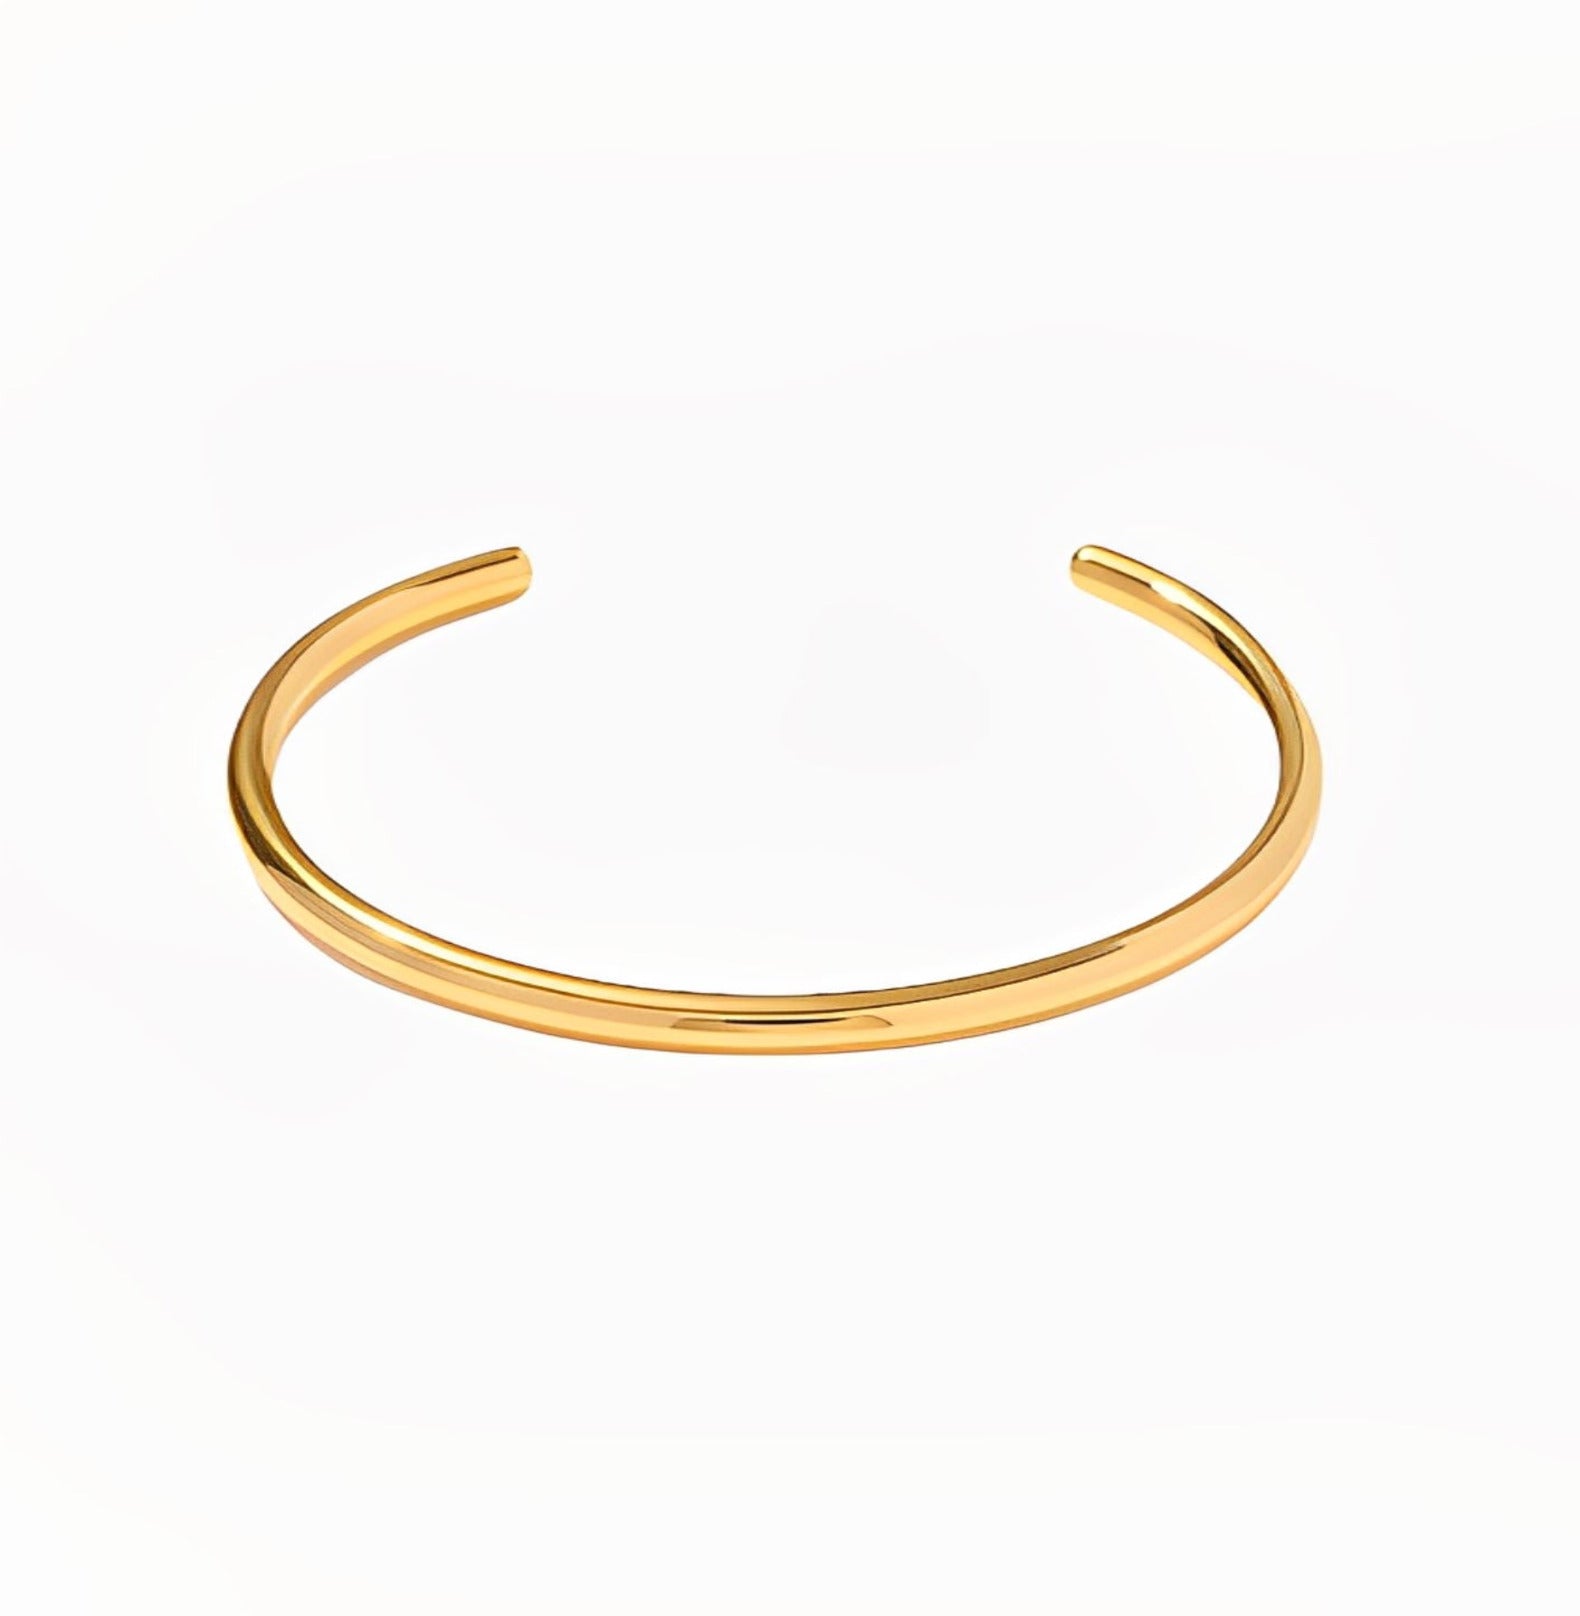 CLASSIC CUFF BRACELET braclet Yubama Jewelry Online Store - The Elegant Designs of Gold and Silver ! 